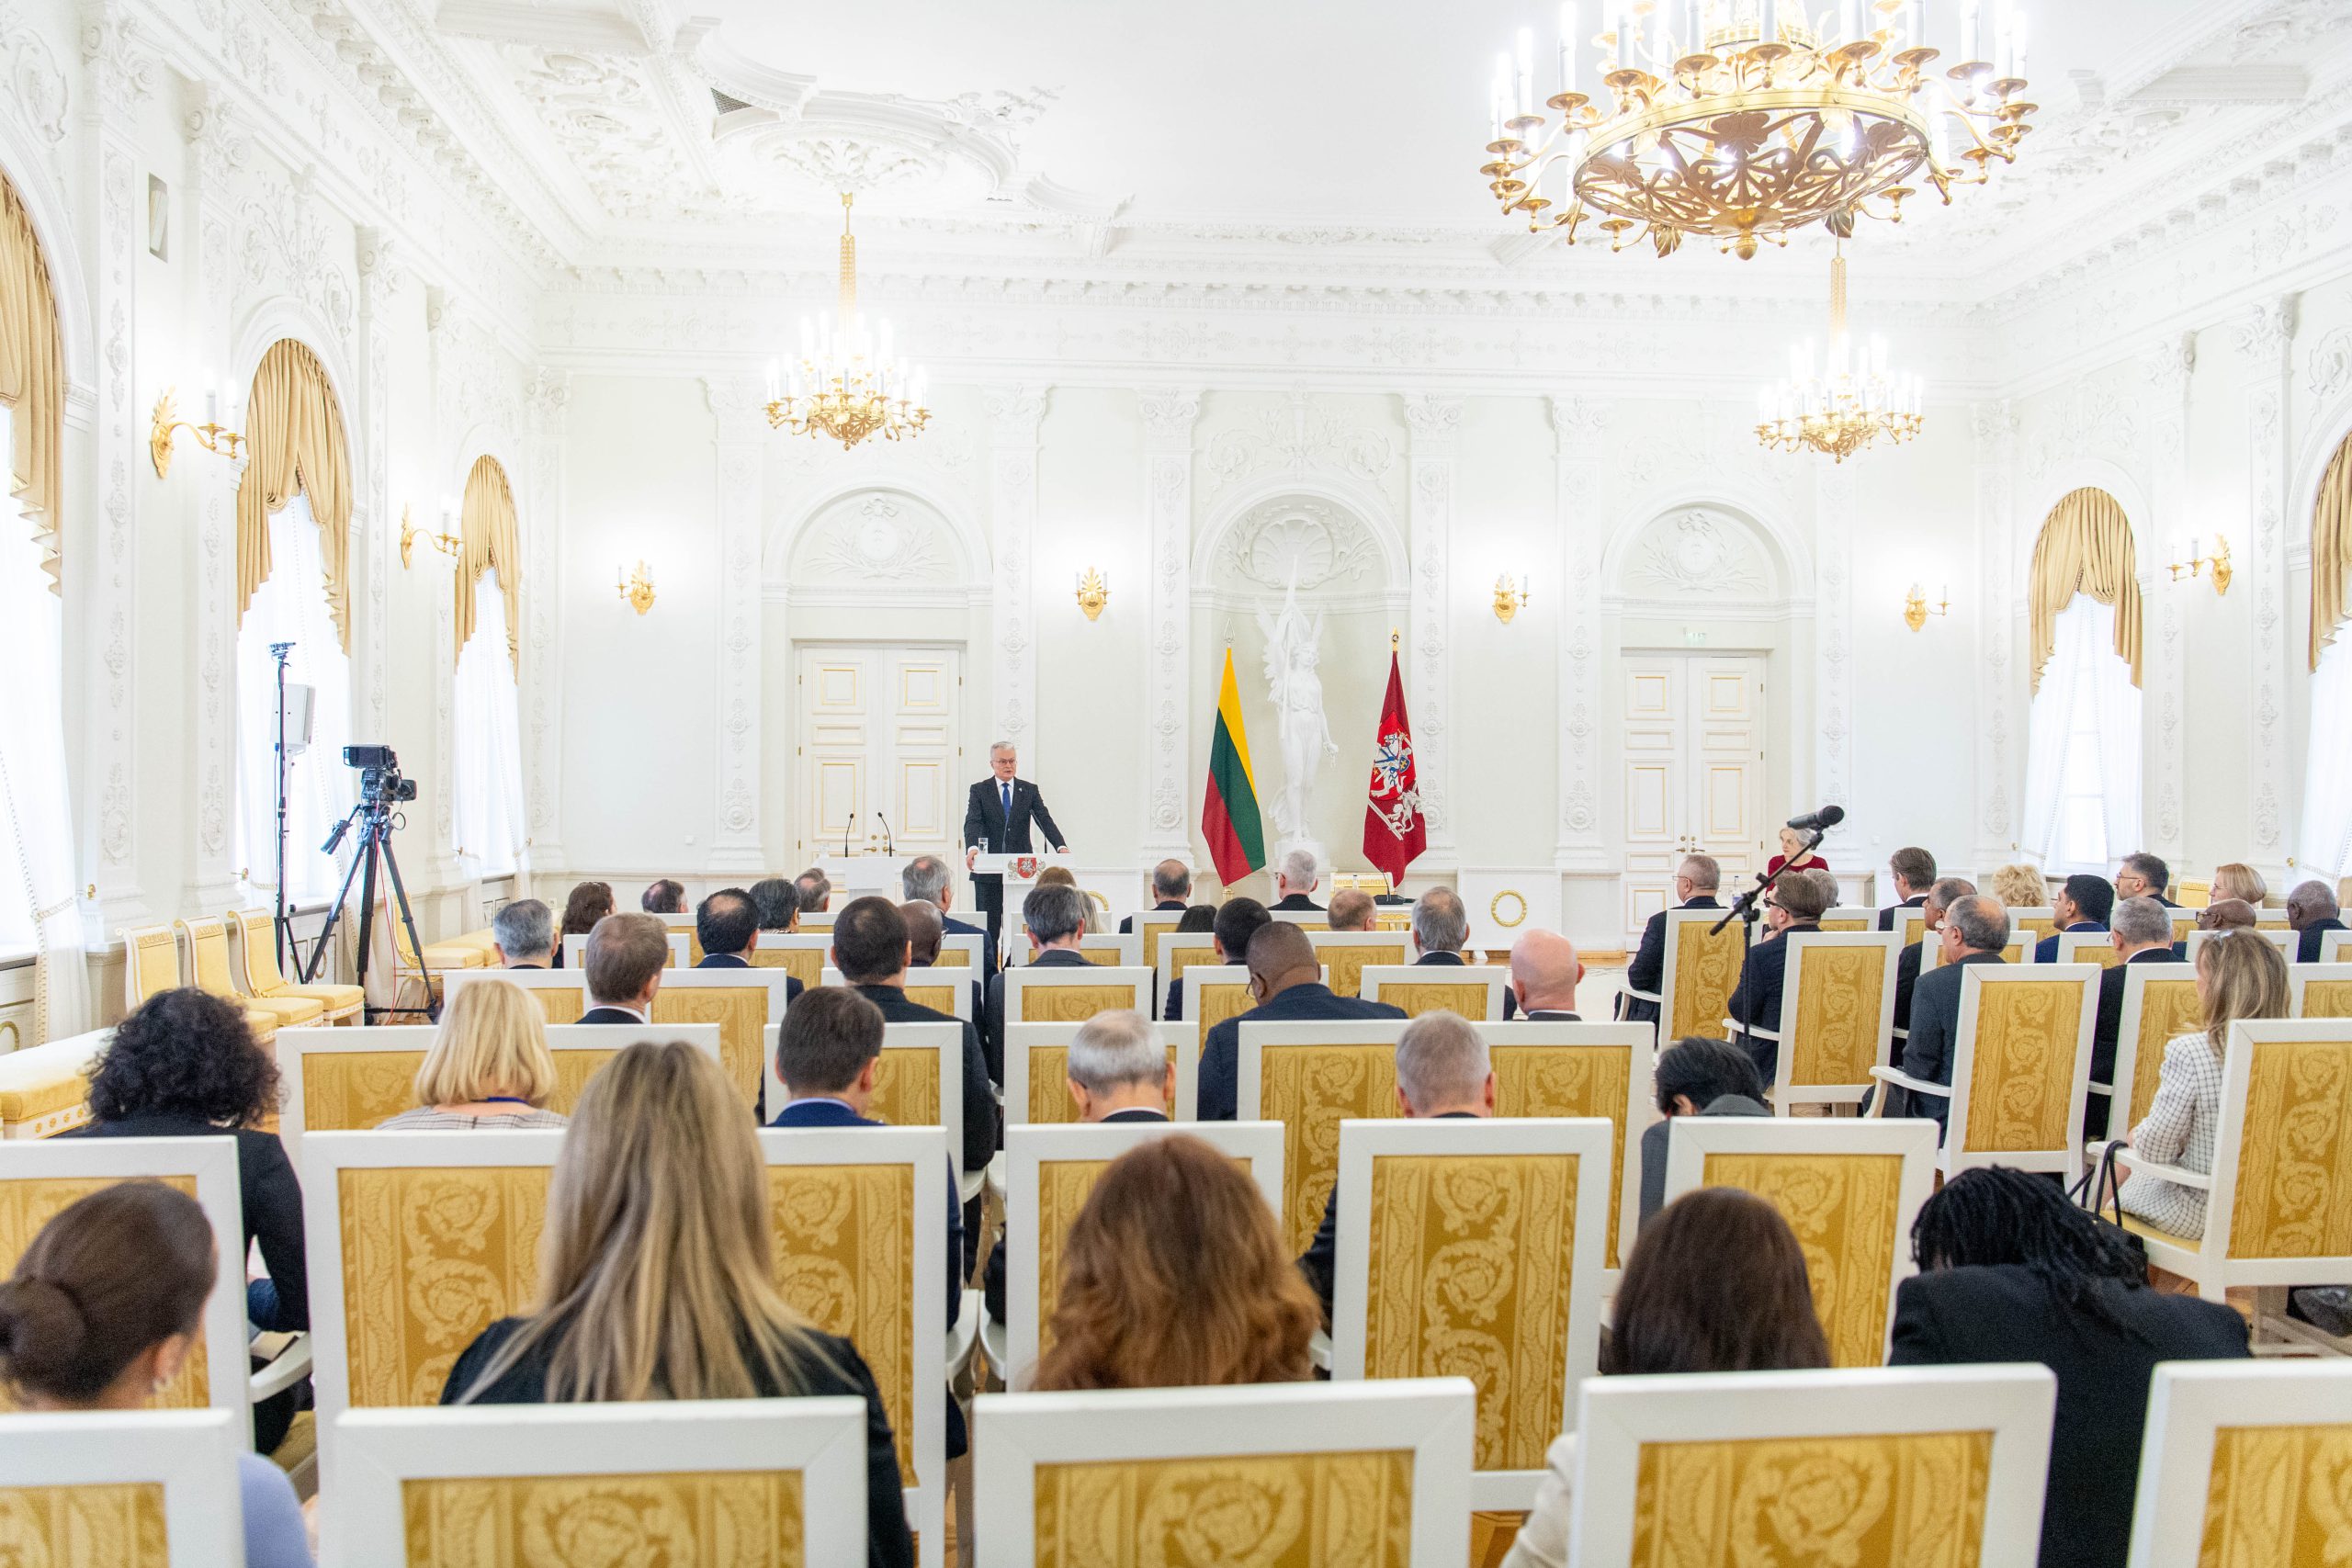 Her excellency Ambassador Priscilla Misihairabwi-Mushonga’s visit to Lithuania